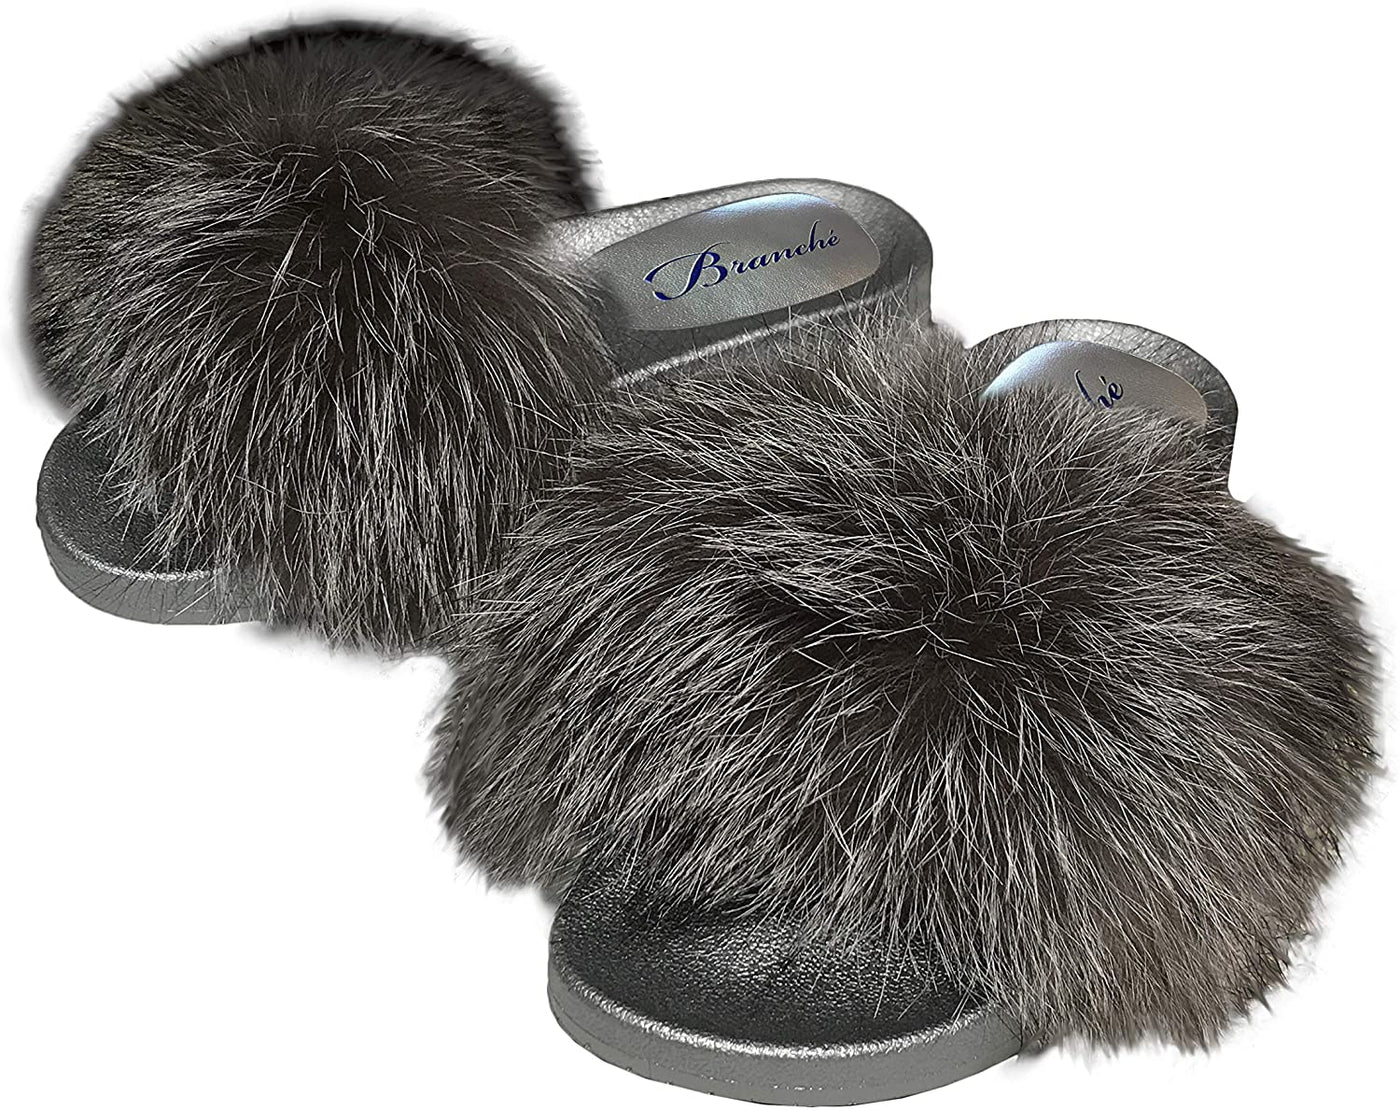 BRANCHE SLIDE SLIPPERS KIKI - NATURAL SILVER (Available in 2 Sizes)